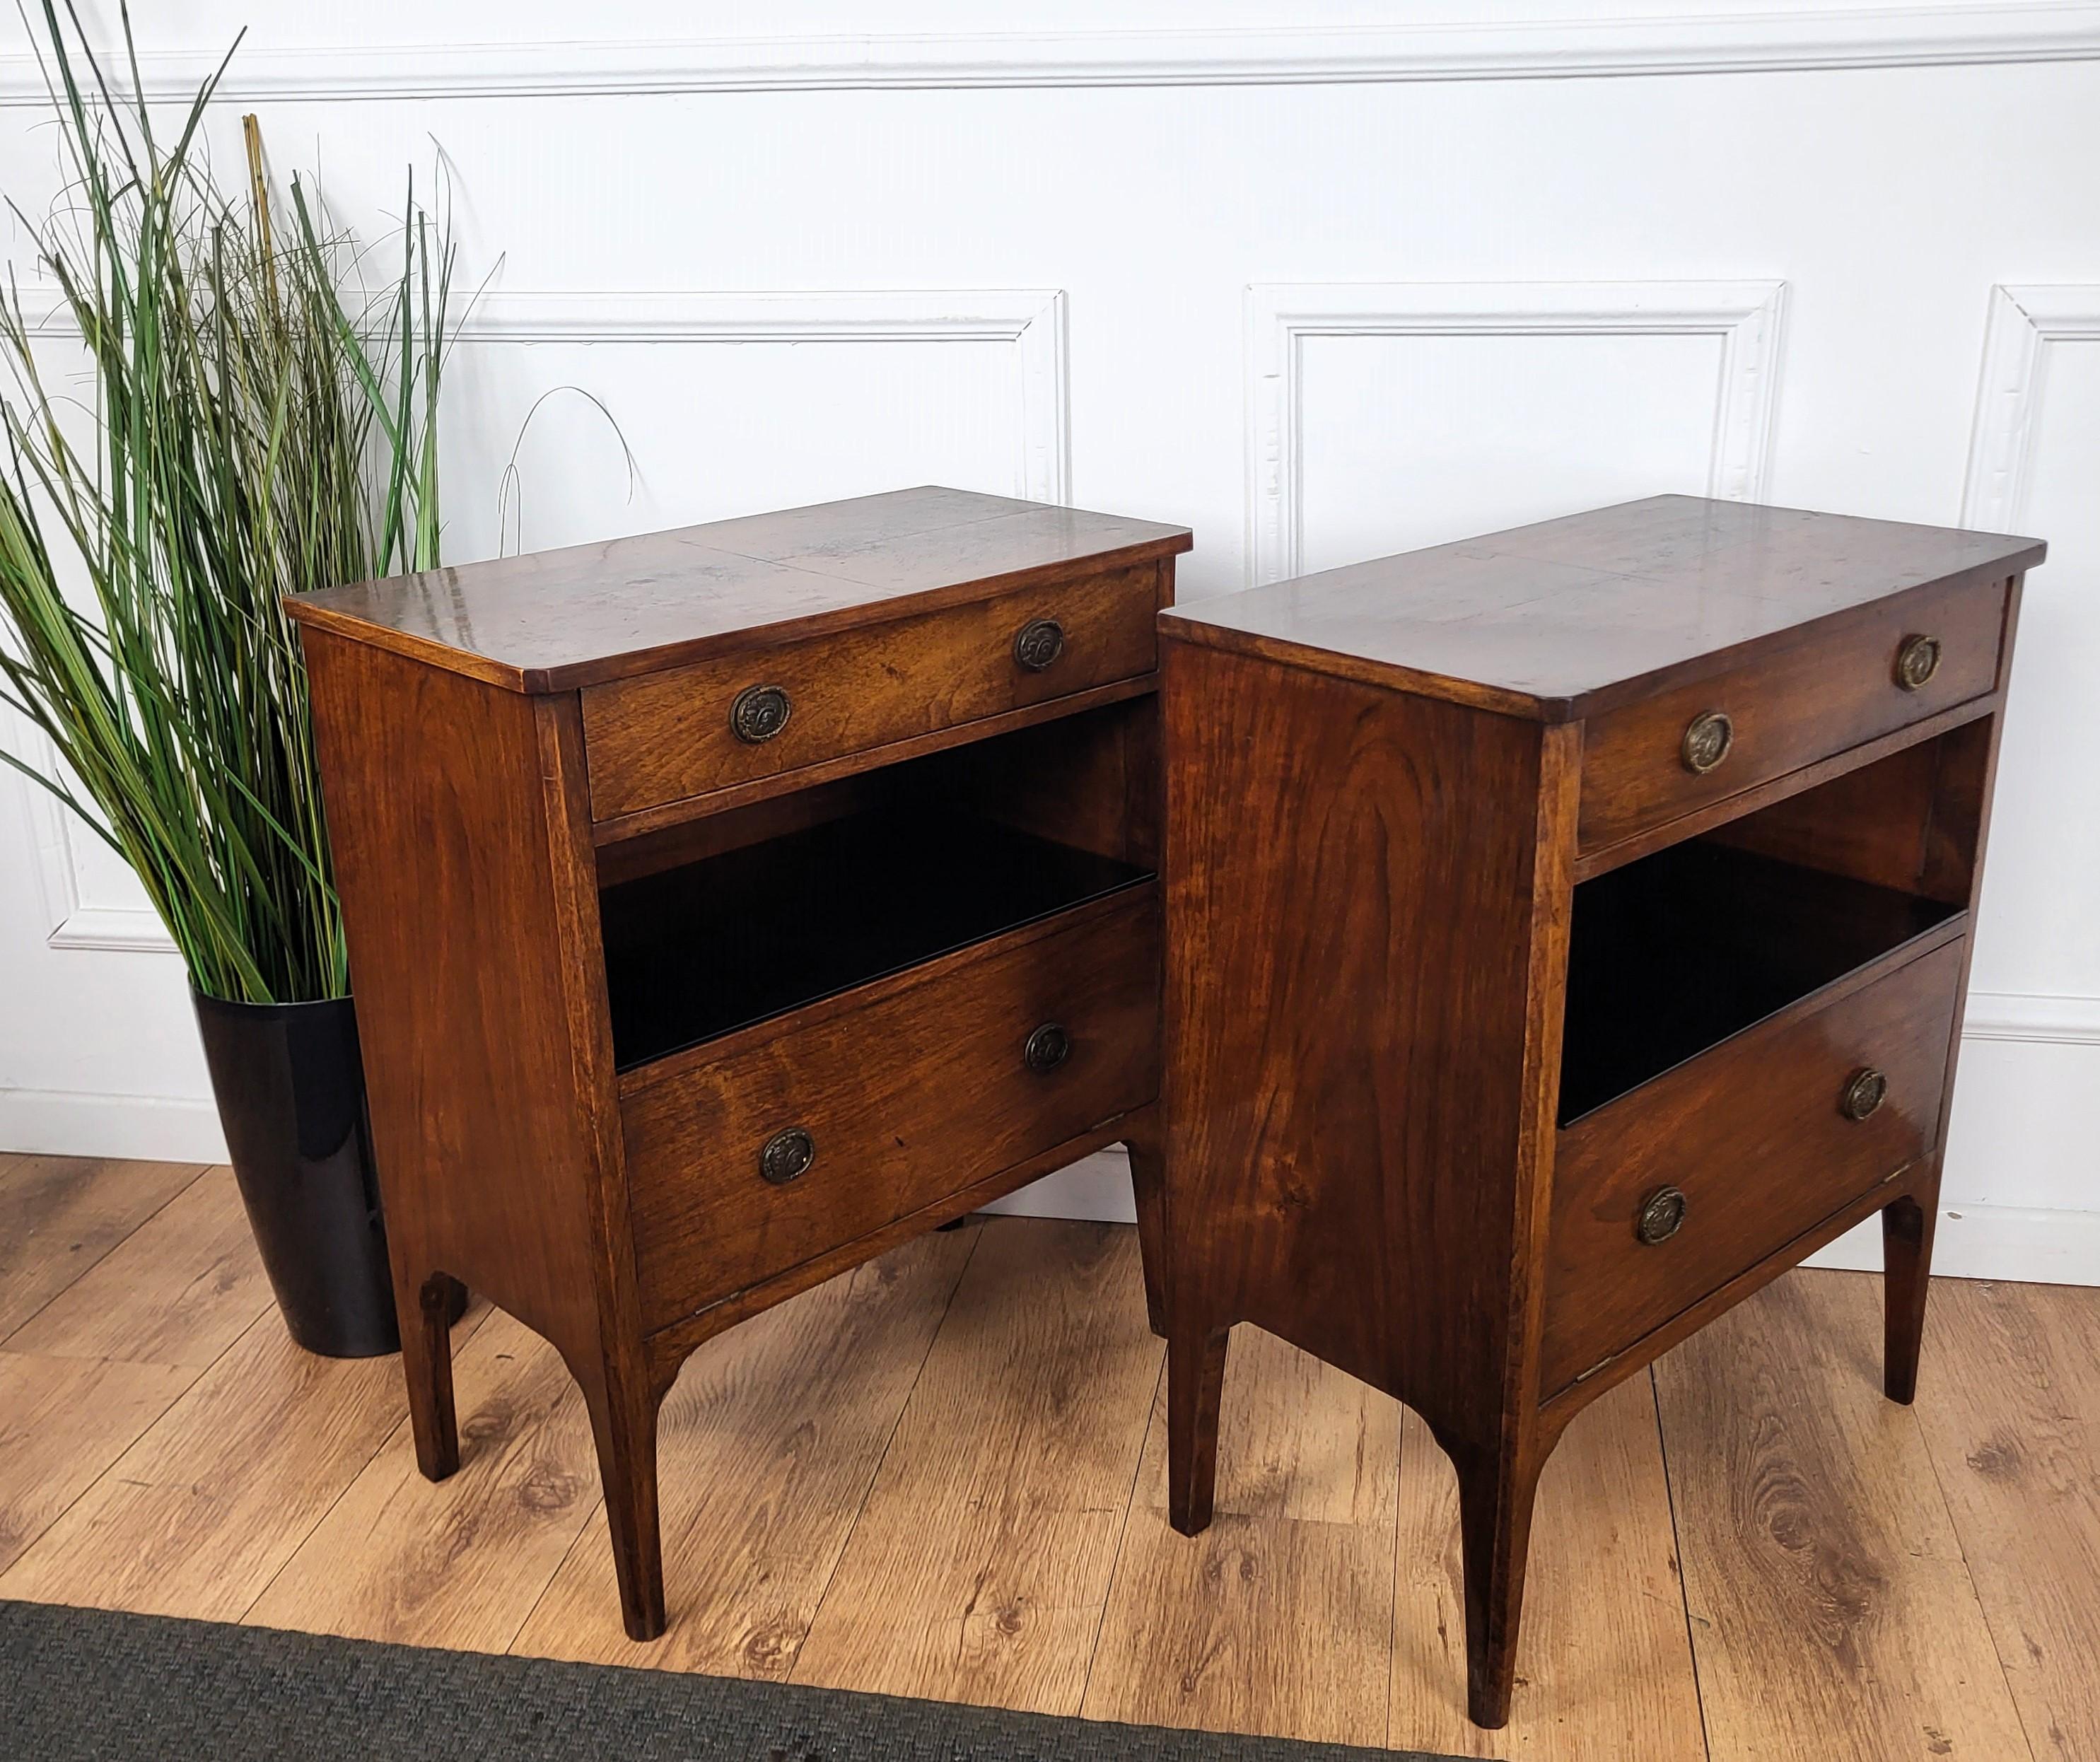 Pair of Mid-Century Modern Italian Rustic Wood Night Stands Bed or Side Tables 1